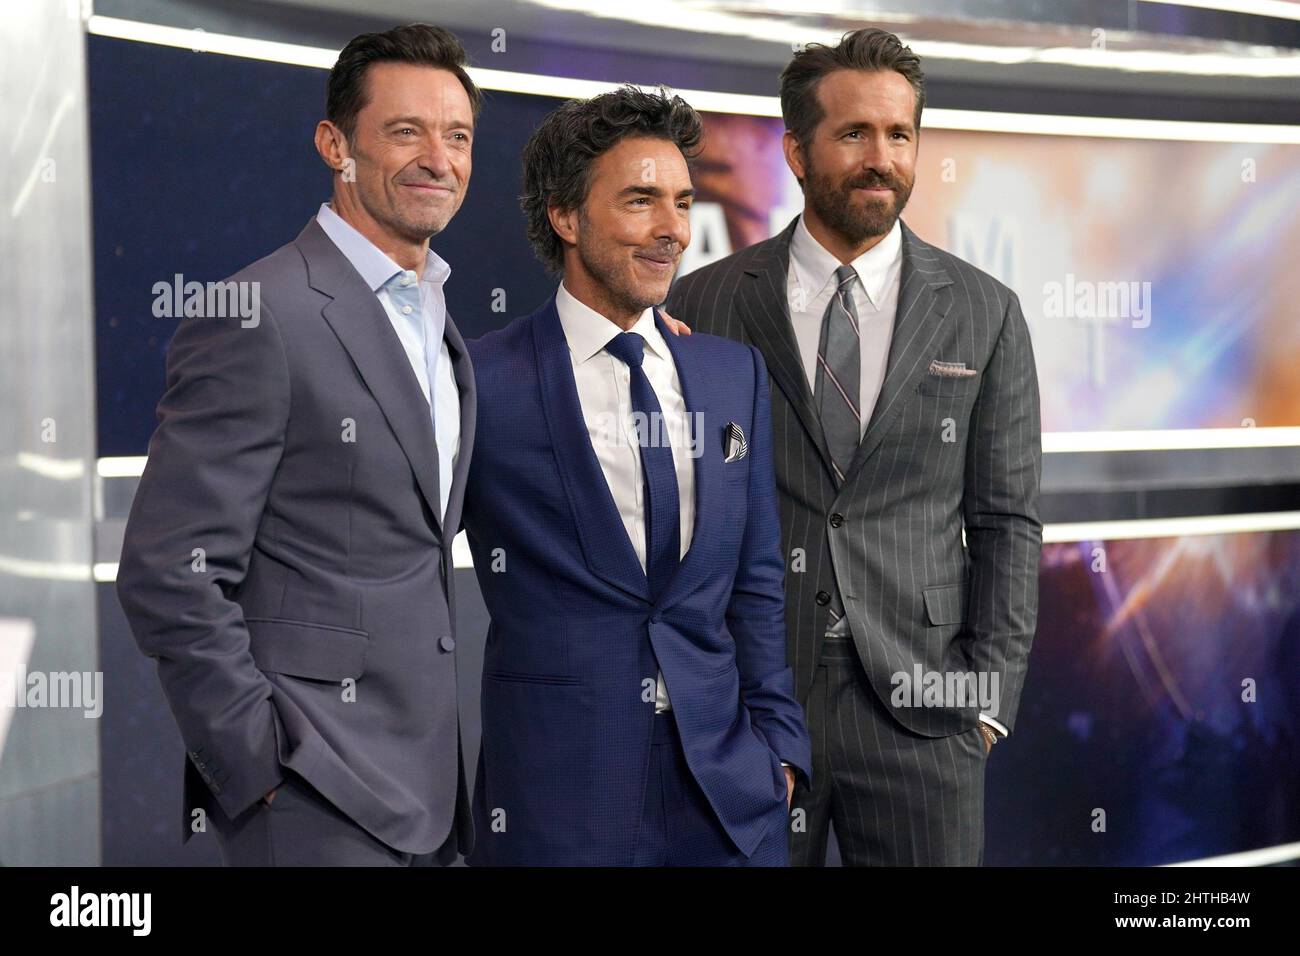 New York, NY, USA. 28th Feb, 2022. Hugh Jackman, Shawn Levy, Ryan Reynolds at arrivals for THE ADAM PROJECT Premiere on NETFLIX, Alice Tully Hall at Lincoln Center, New York, NY February 28, 2022. Credit: Kristin Callahan/Everett Collection/Alamy Live News Stock Photo